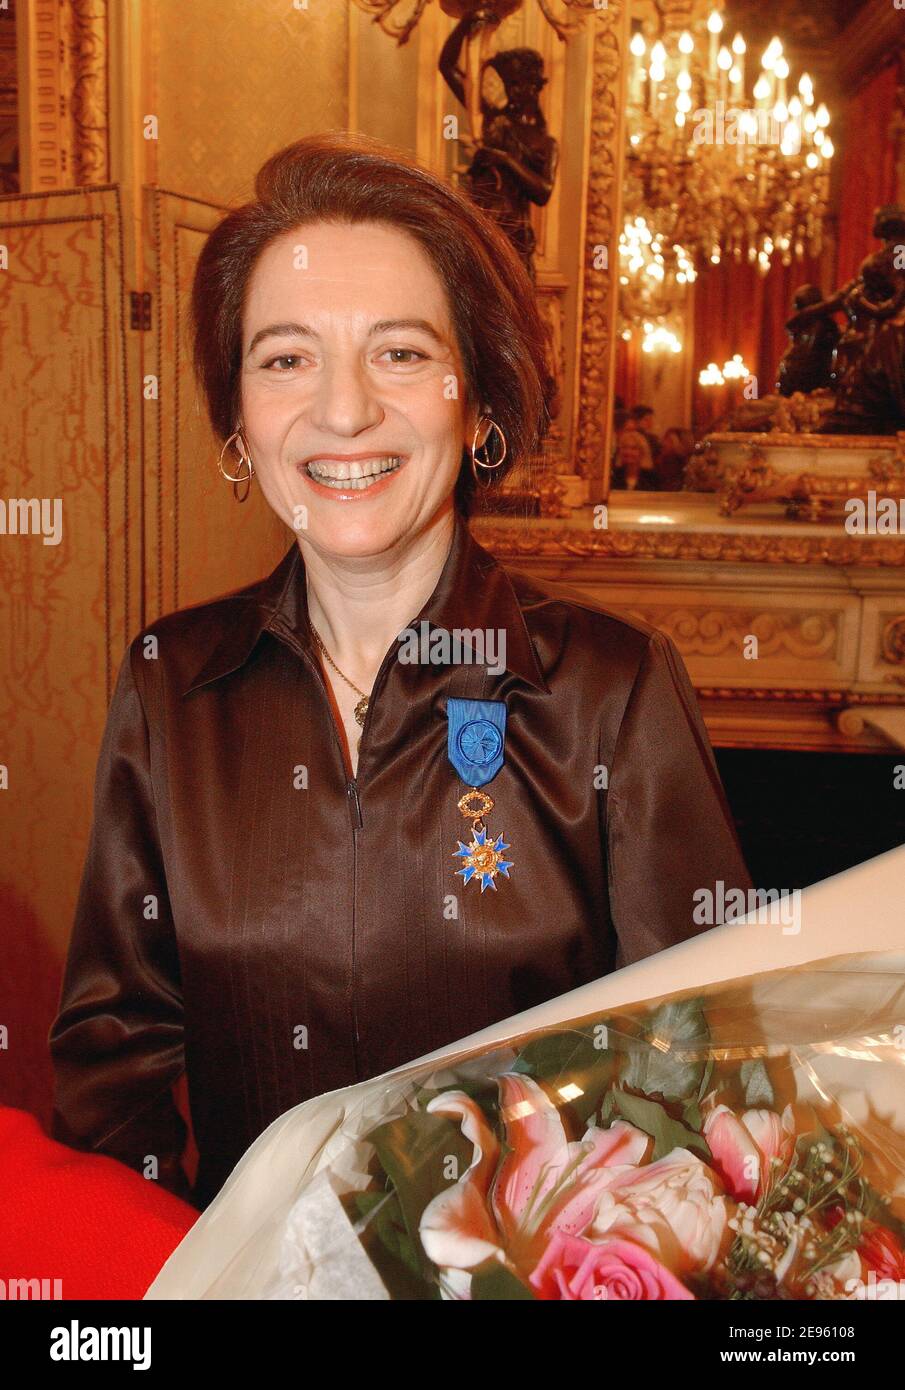 NO TABLOIDS. EXCLUSIVE. French Tv Producer Simone Harari receives the 'Ordre National du Merite' medal at the Foreign Affairs palace in Paris, France, on March 2, 2006. Photo by Bruno Klein/ABACAPRESS.COM Stock Photo